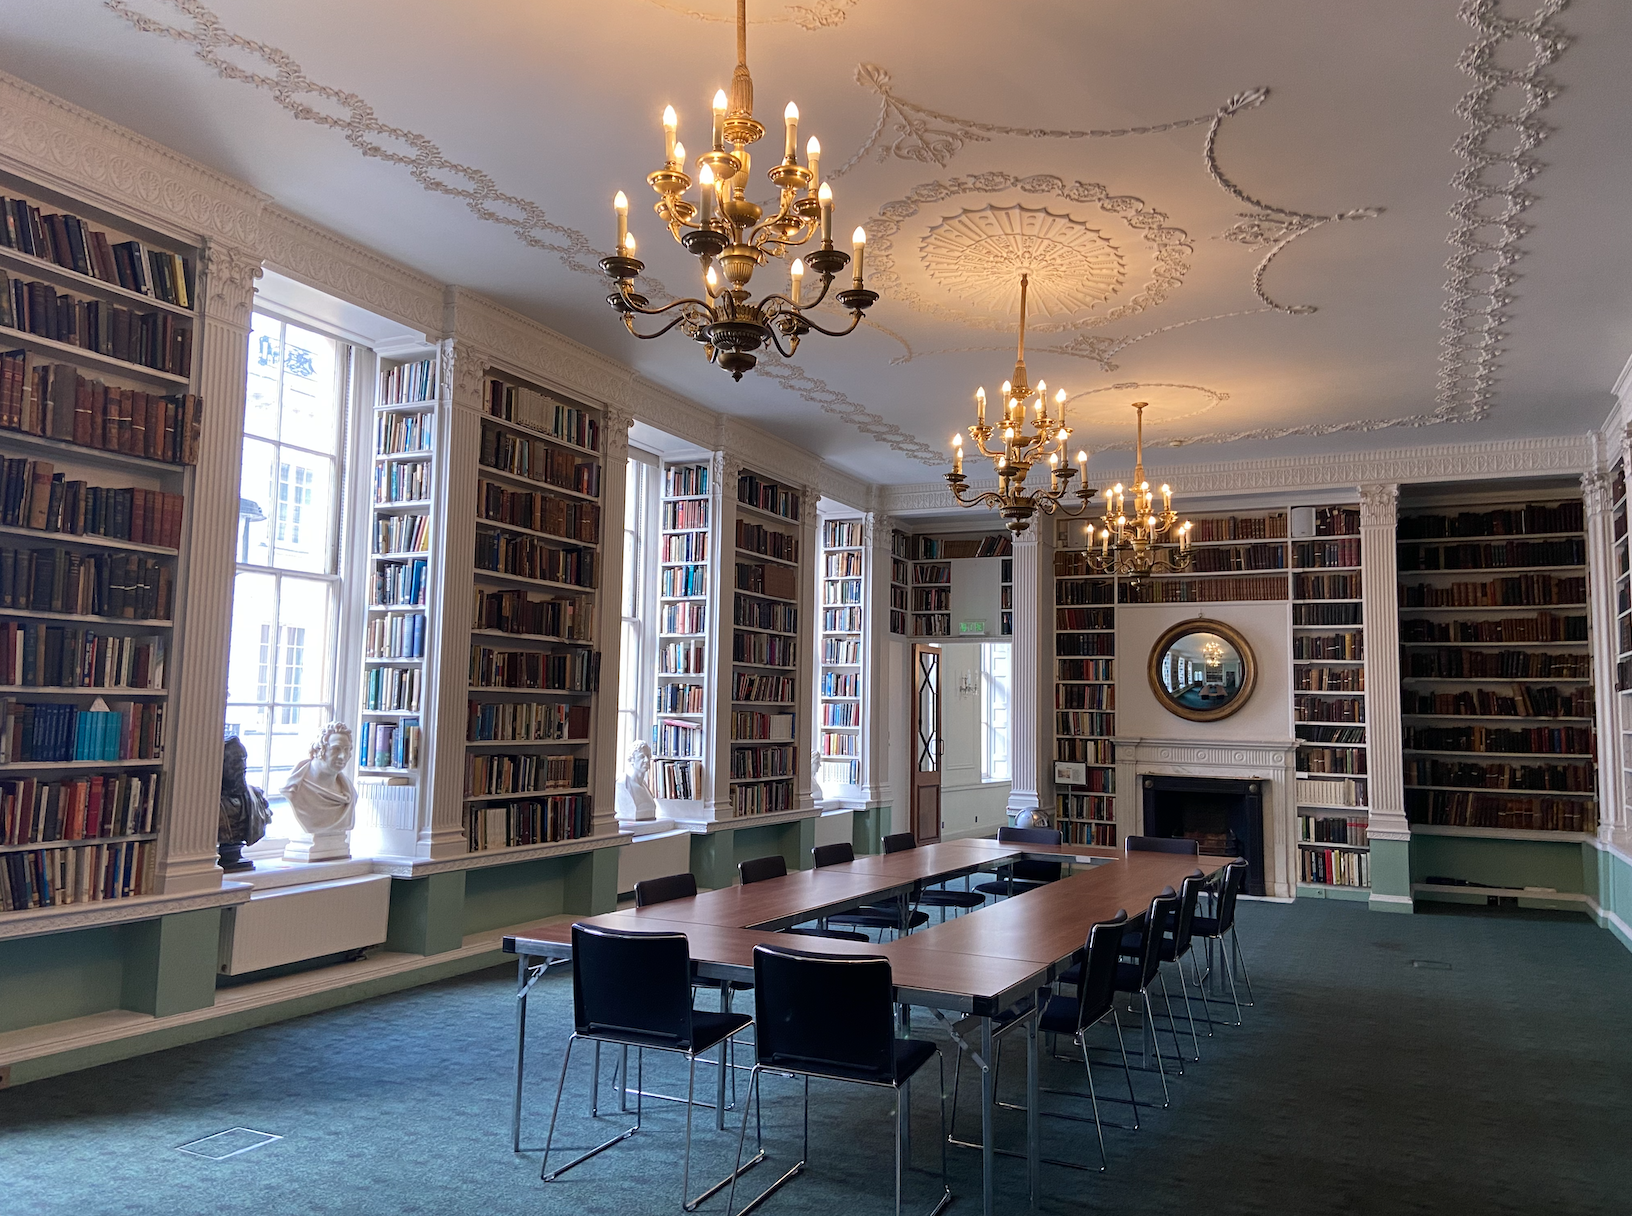 Library with white walls, blue carpet flooring, nine full bookcases, a white and black fireplace, three chandeliers, a brown rectangular table with a smaller rectangular hole in the middle, 12 blue chairs with metal legs around the table and four white busts of scientists